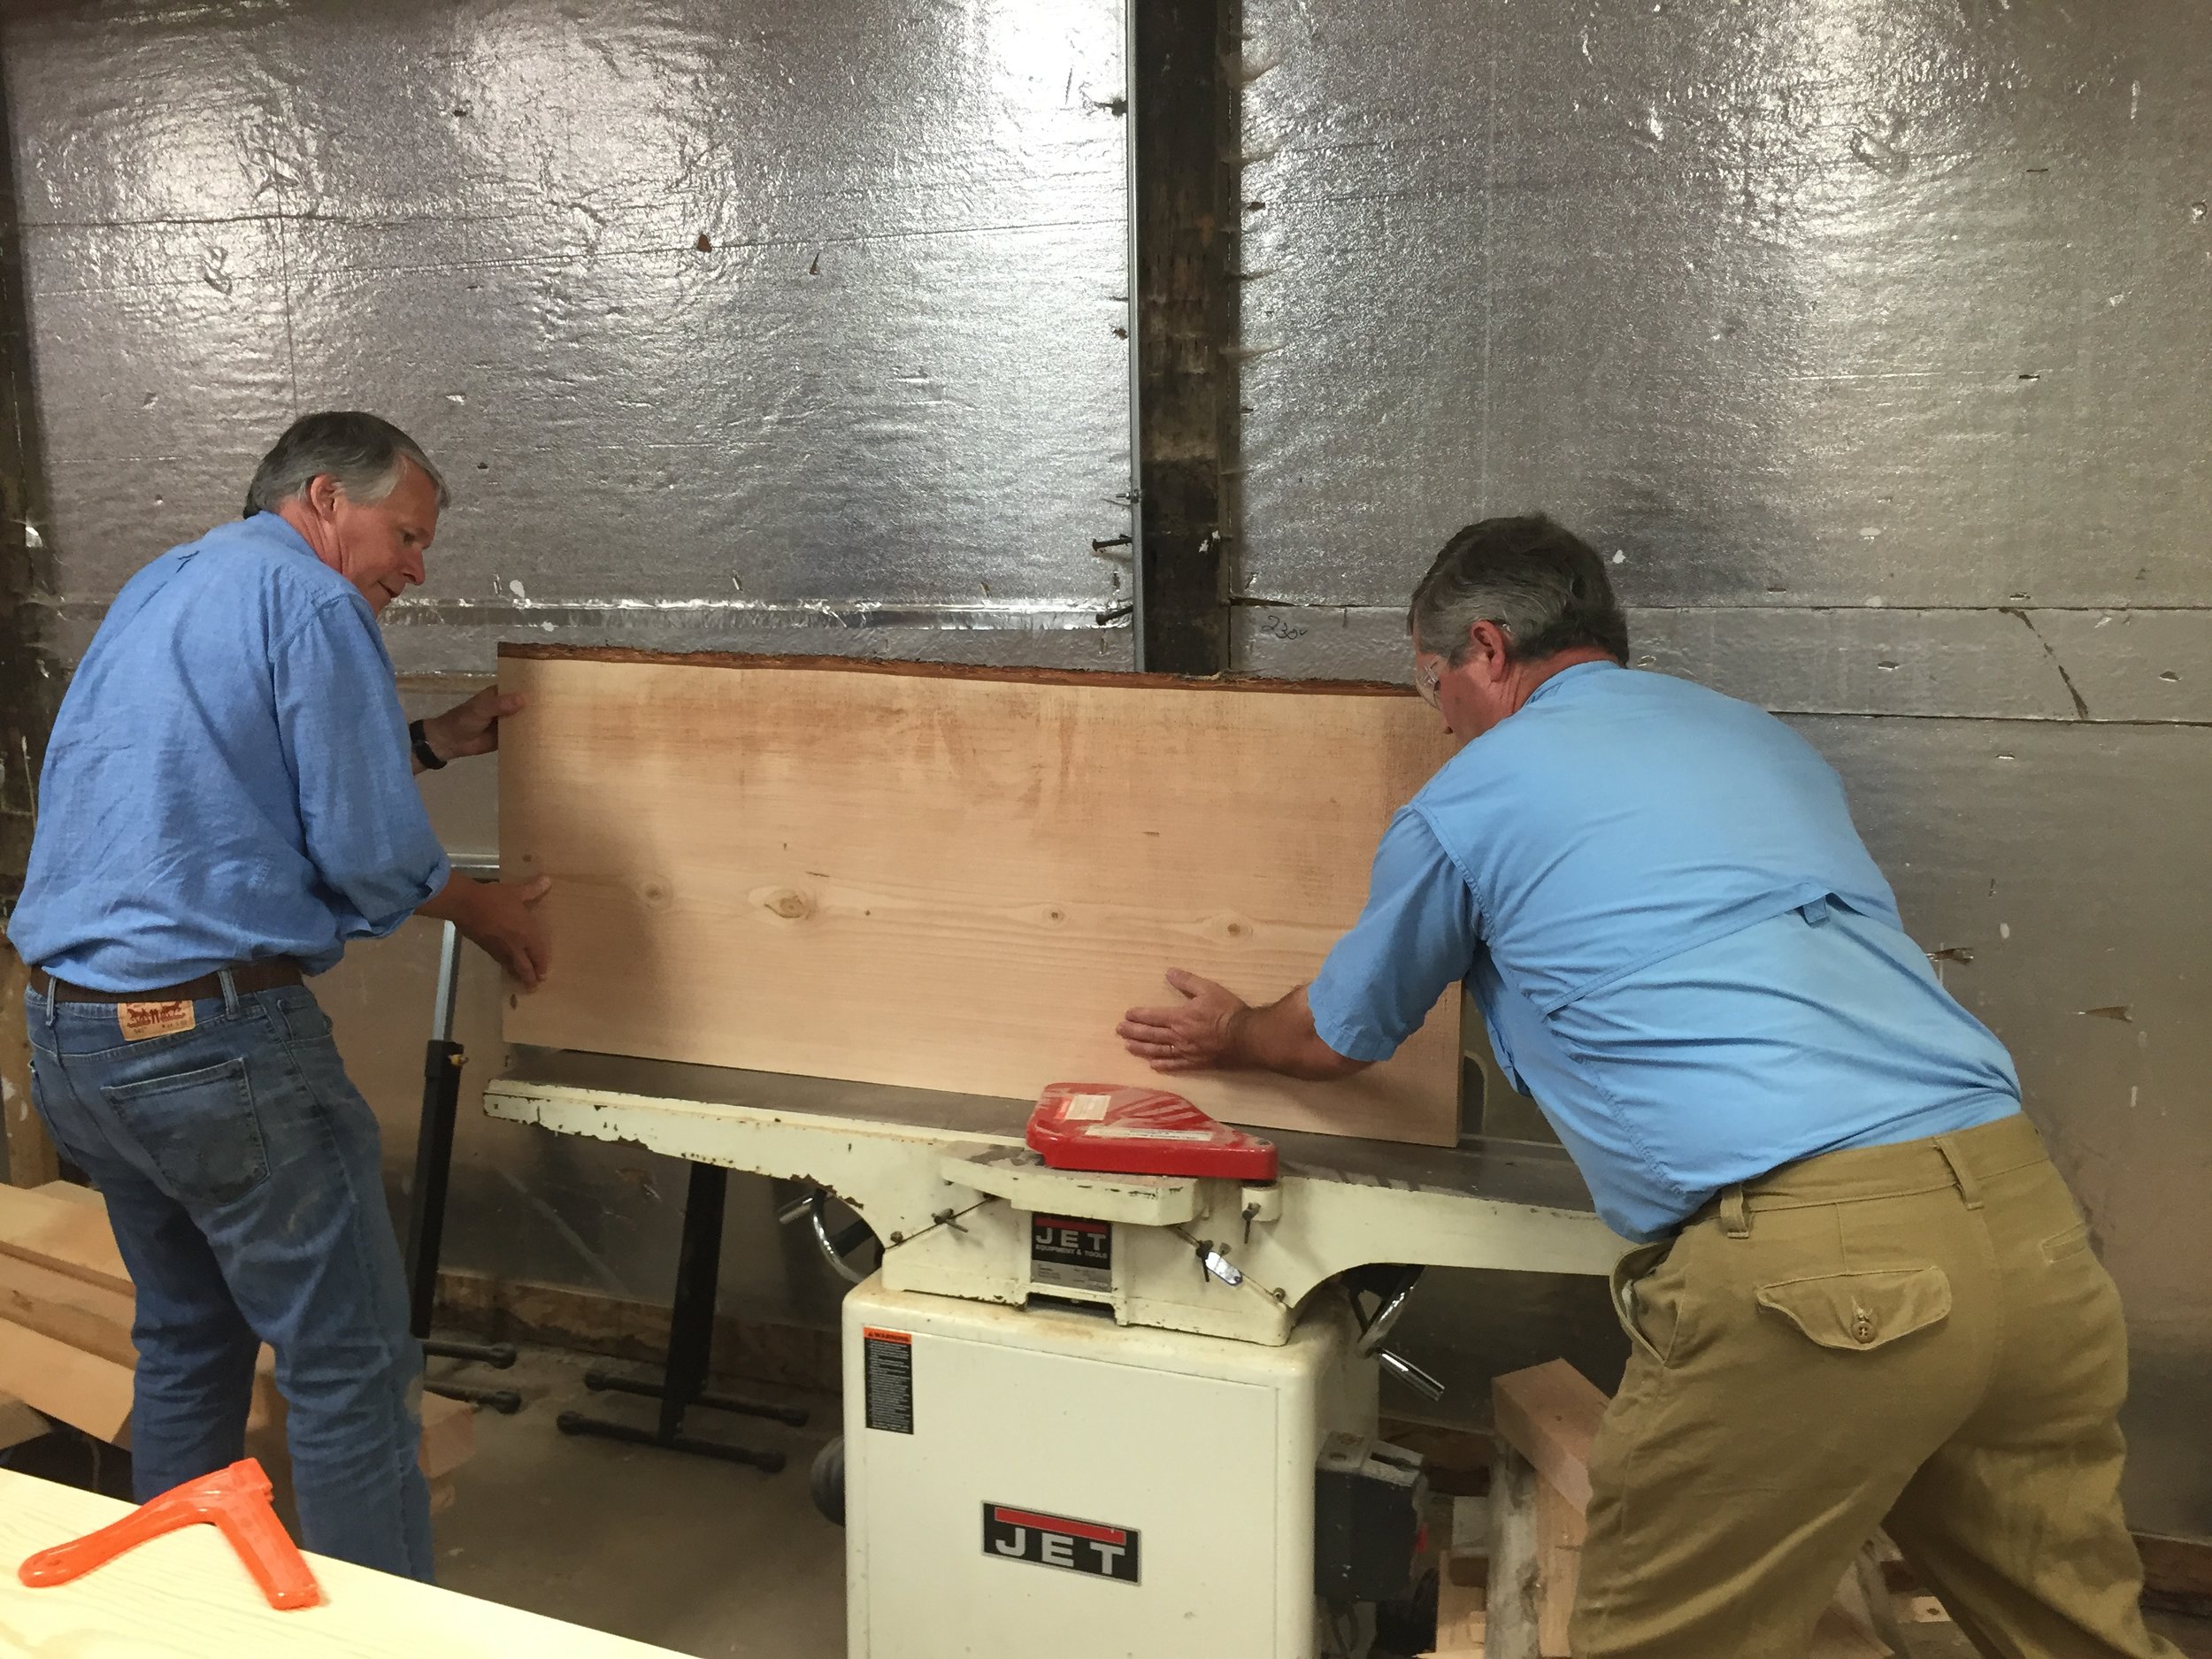  We provided the desk and table tops for Port Blakely, but the bases of the desk and meeting table were constructed by another company. For this project, my dad and I learned how to joint the wood. In this picture, our good friend Cort is showing my 